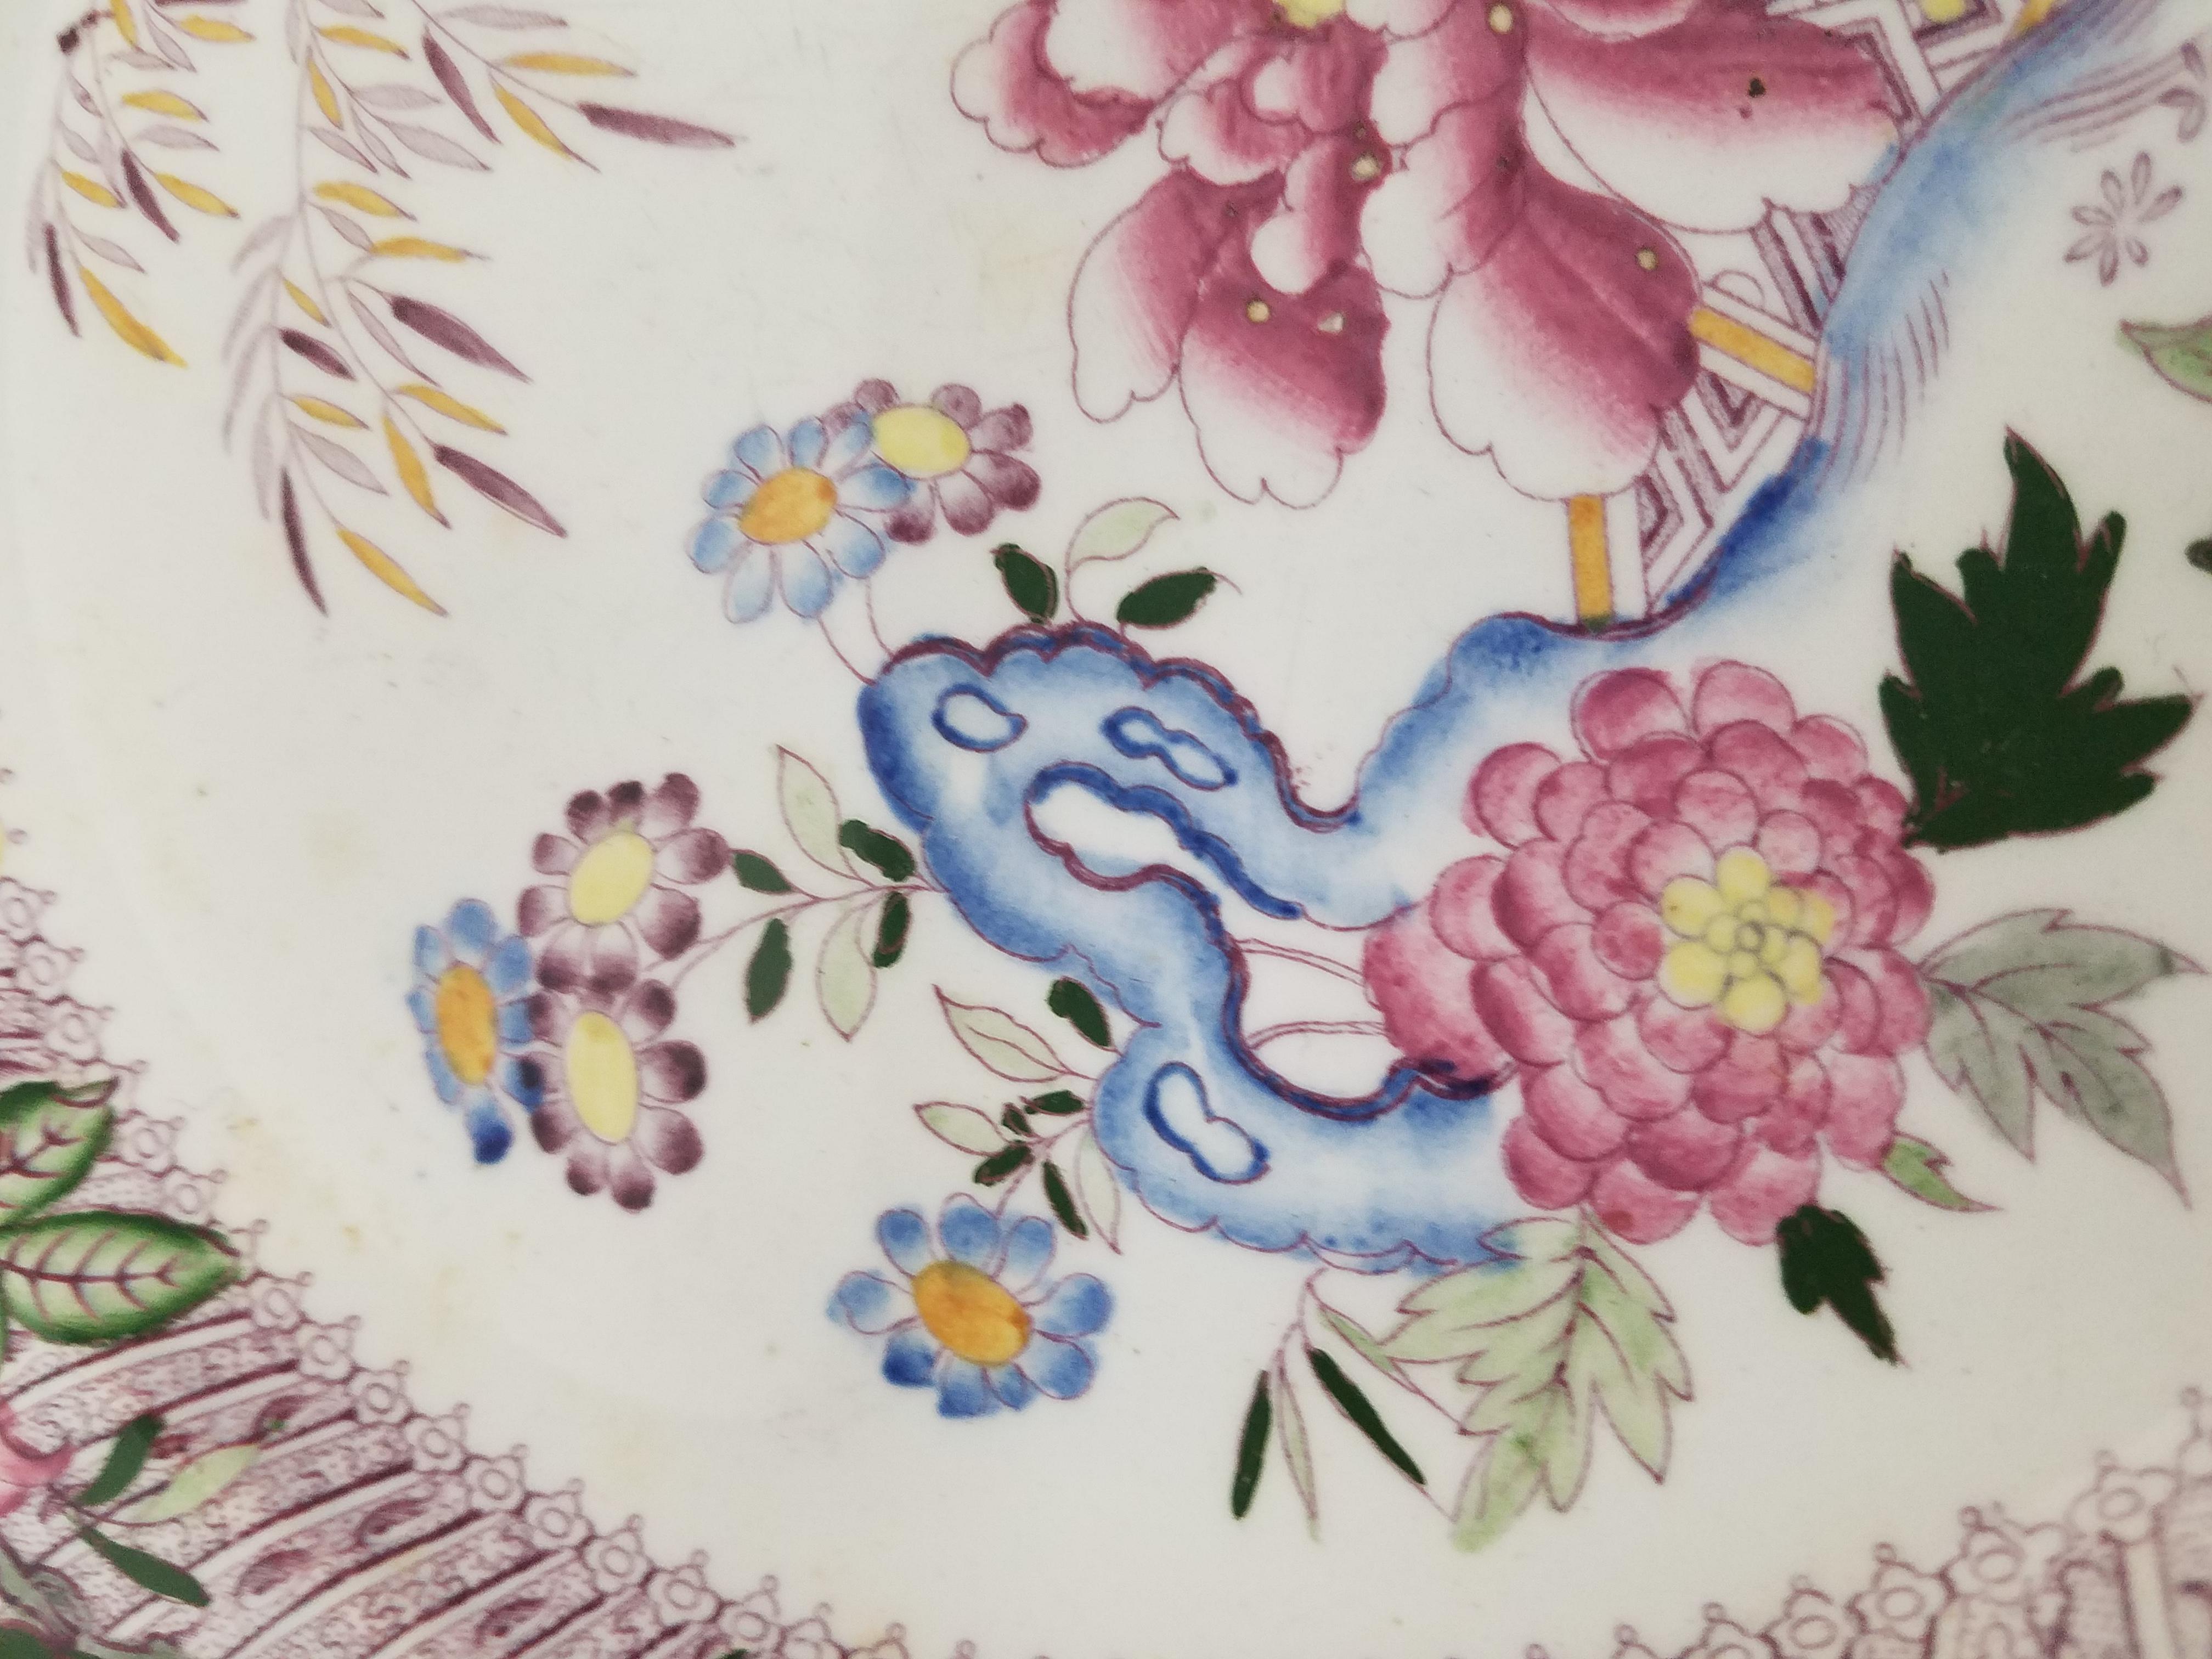 Wonderful mid-19th century English Dinner Plates with polychrome chinoiserie Design. The layered border with a transfer decoration with an overlay of hand enabled Asian floral motif. One showing a blue underglaze mark suggesting these are Minton,